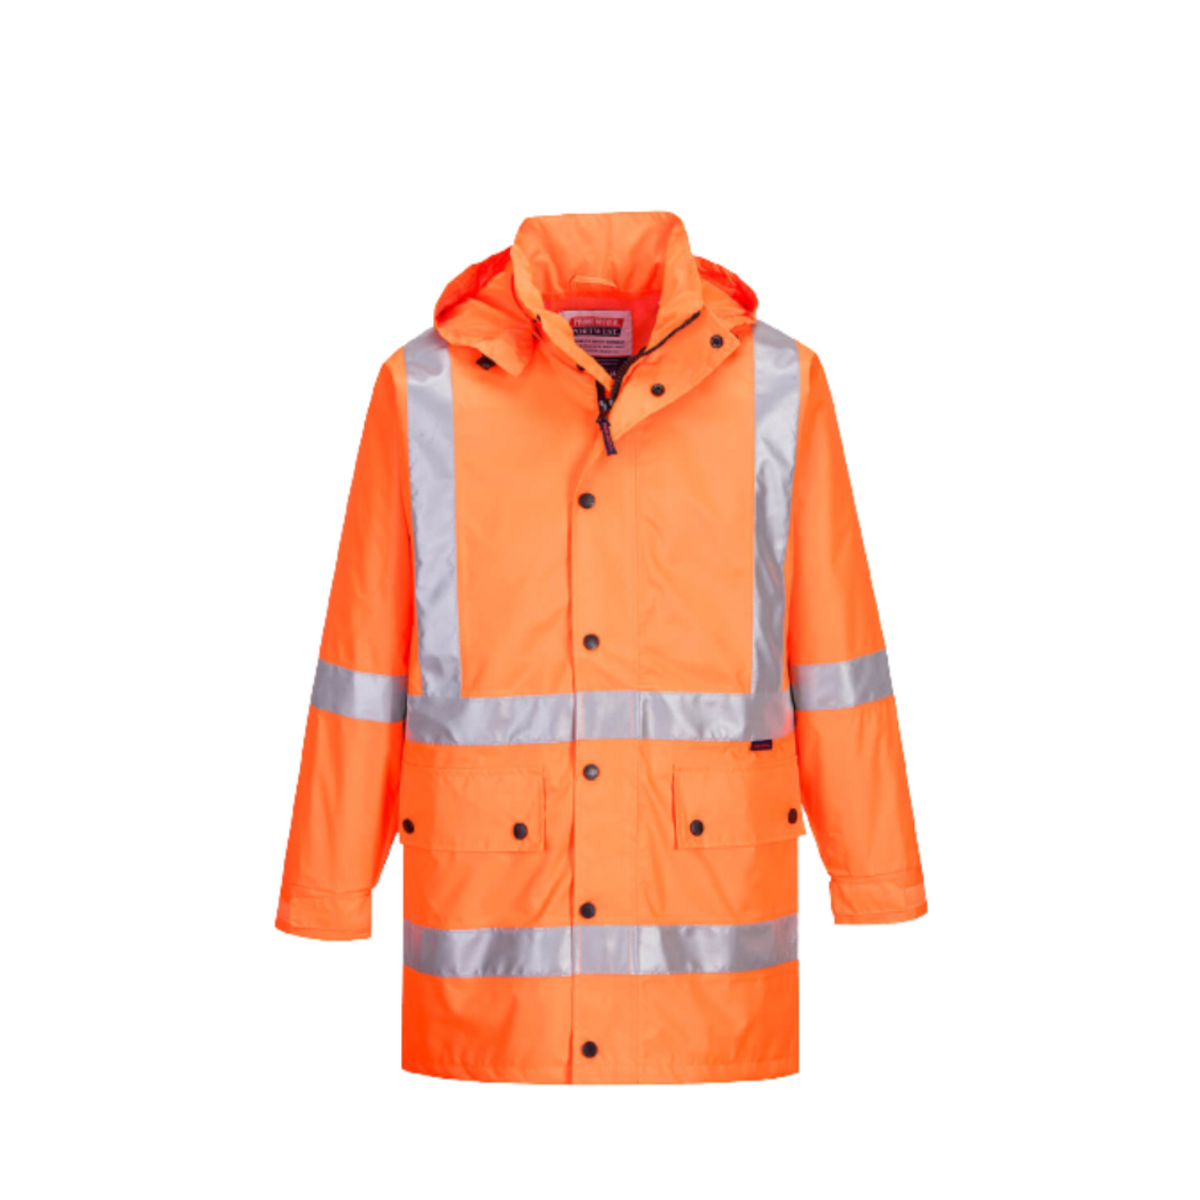 Portwest Max Rain Jacket with Cross Back Tape Reflective Work Safety MX306-Collins Clothing Co